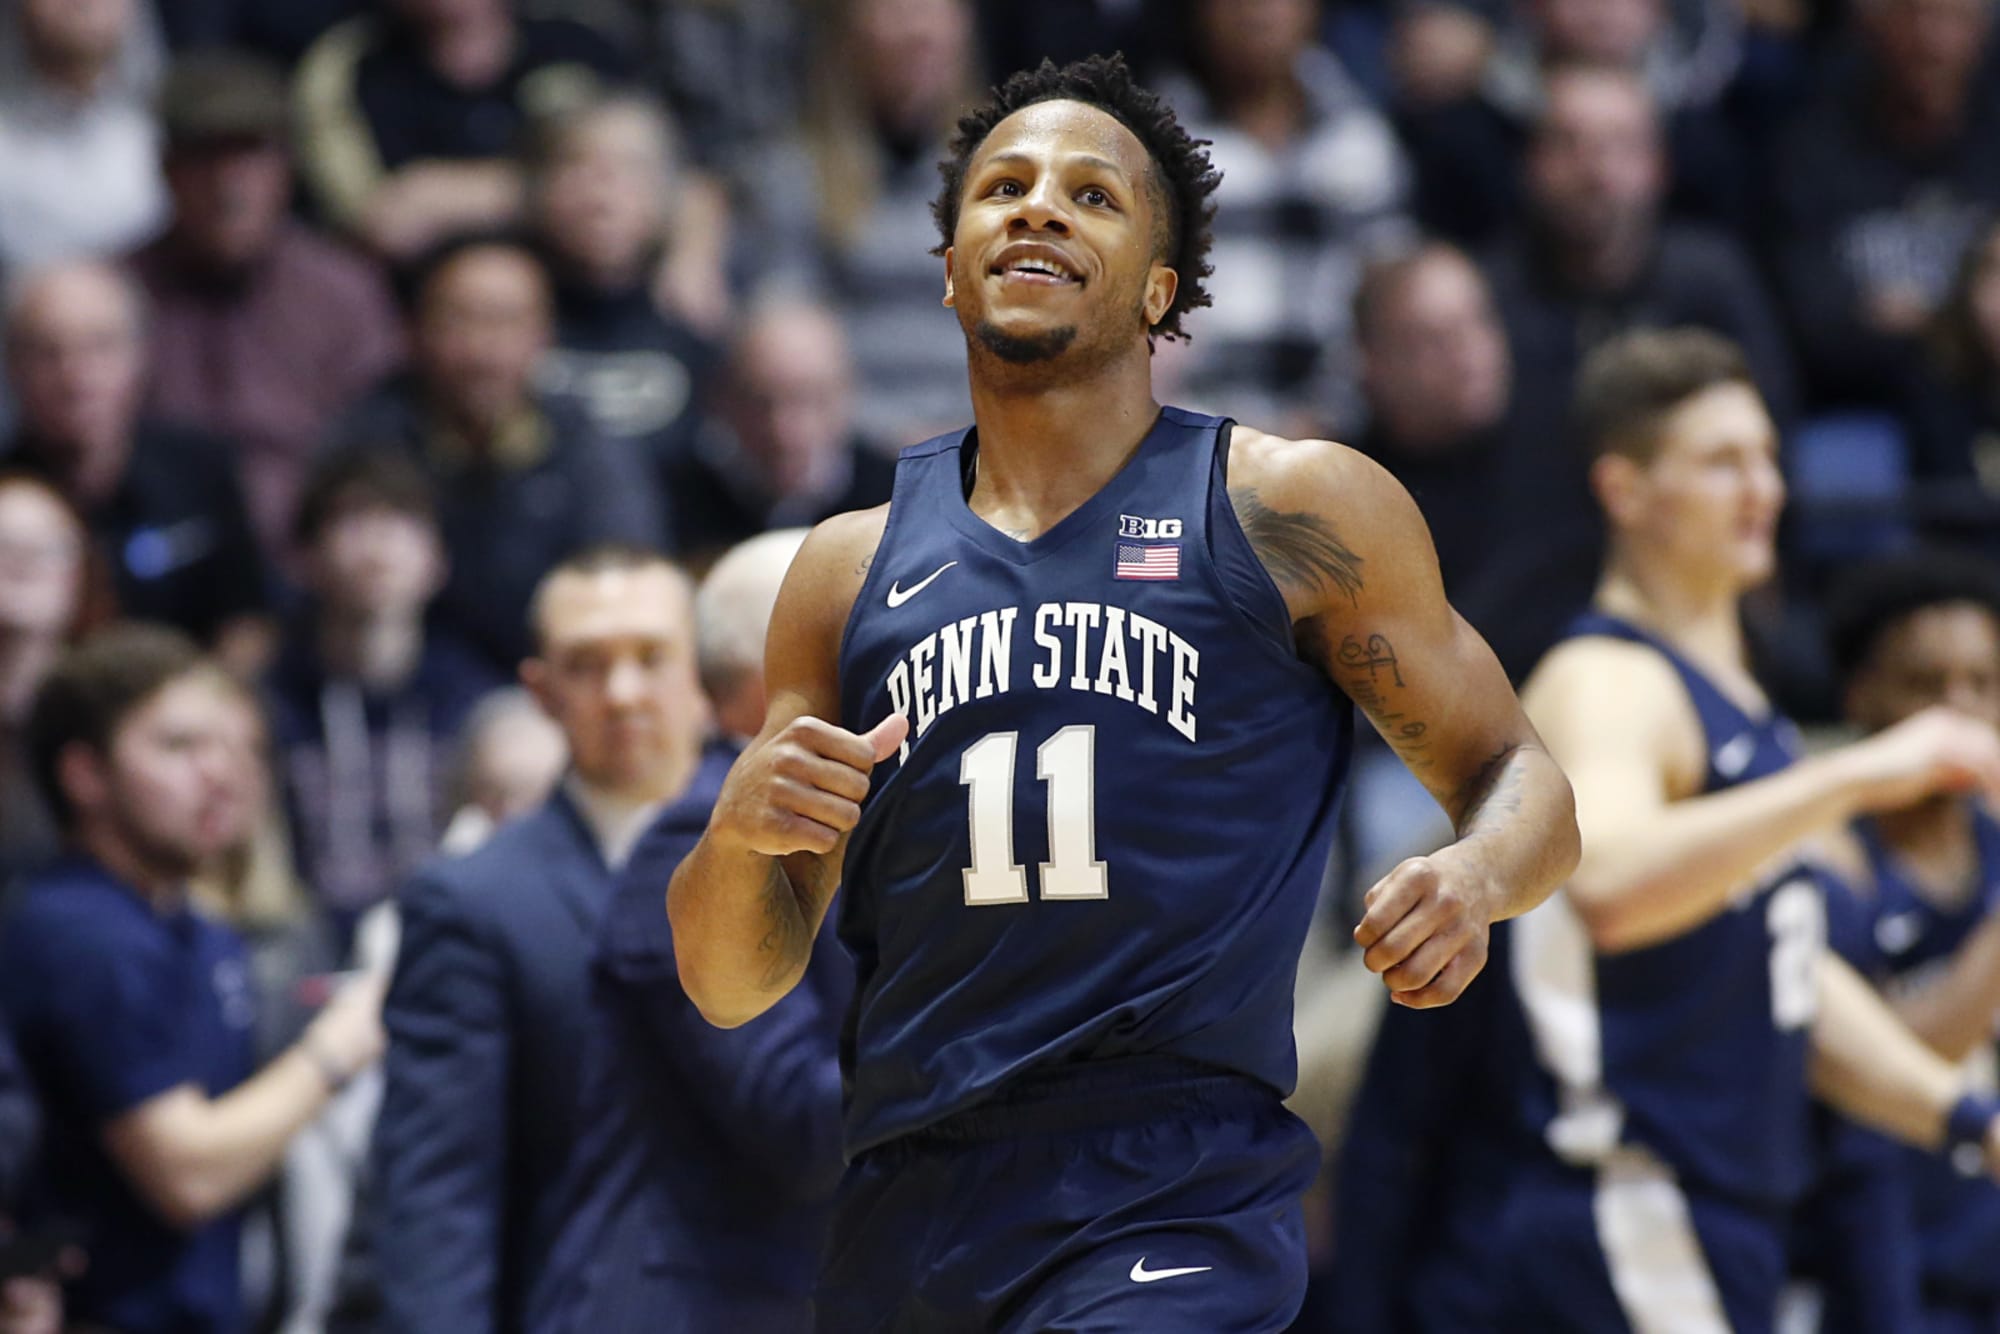 illinois-vs-penn-state-2019-20-basketball-game-preview-tv-schedule